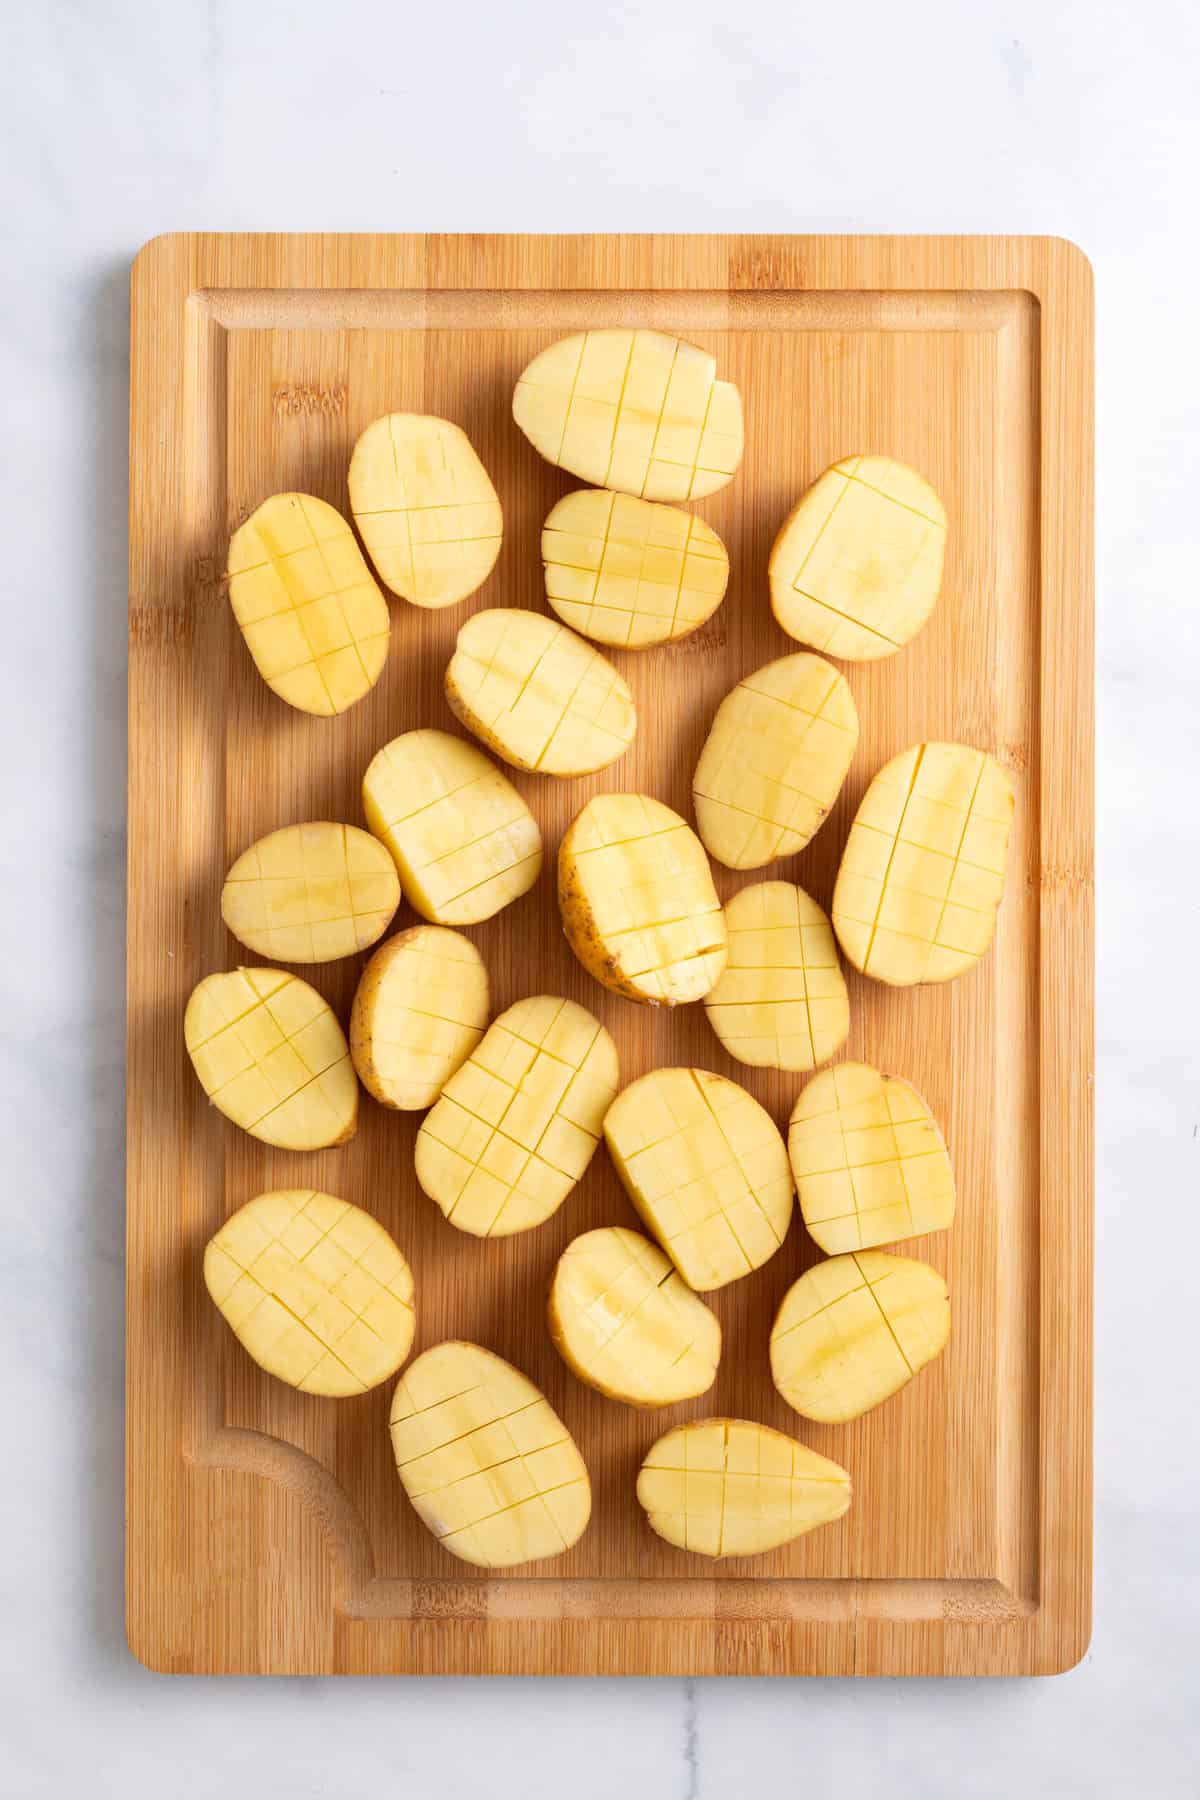 small gold potatoes cut in half long ways and scored vertically and horizontally